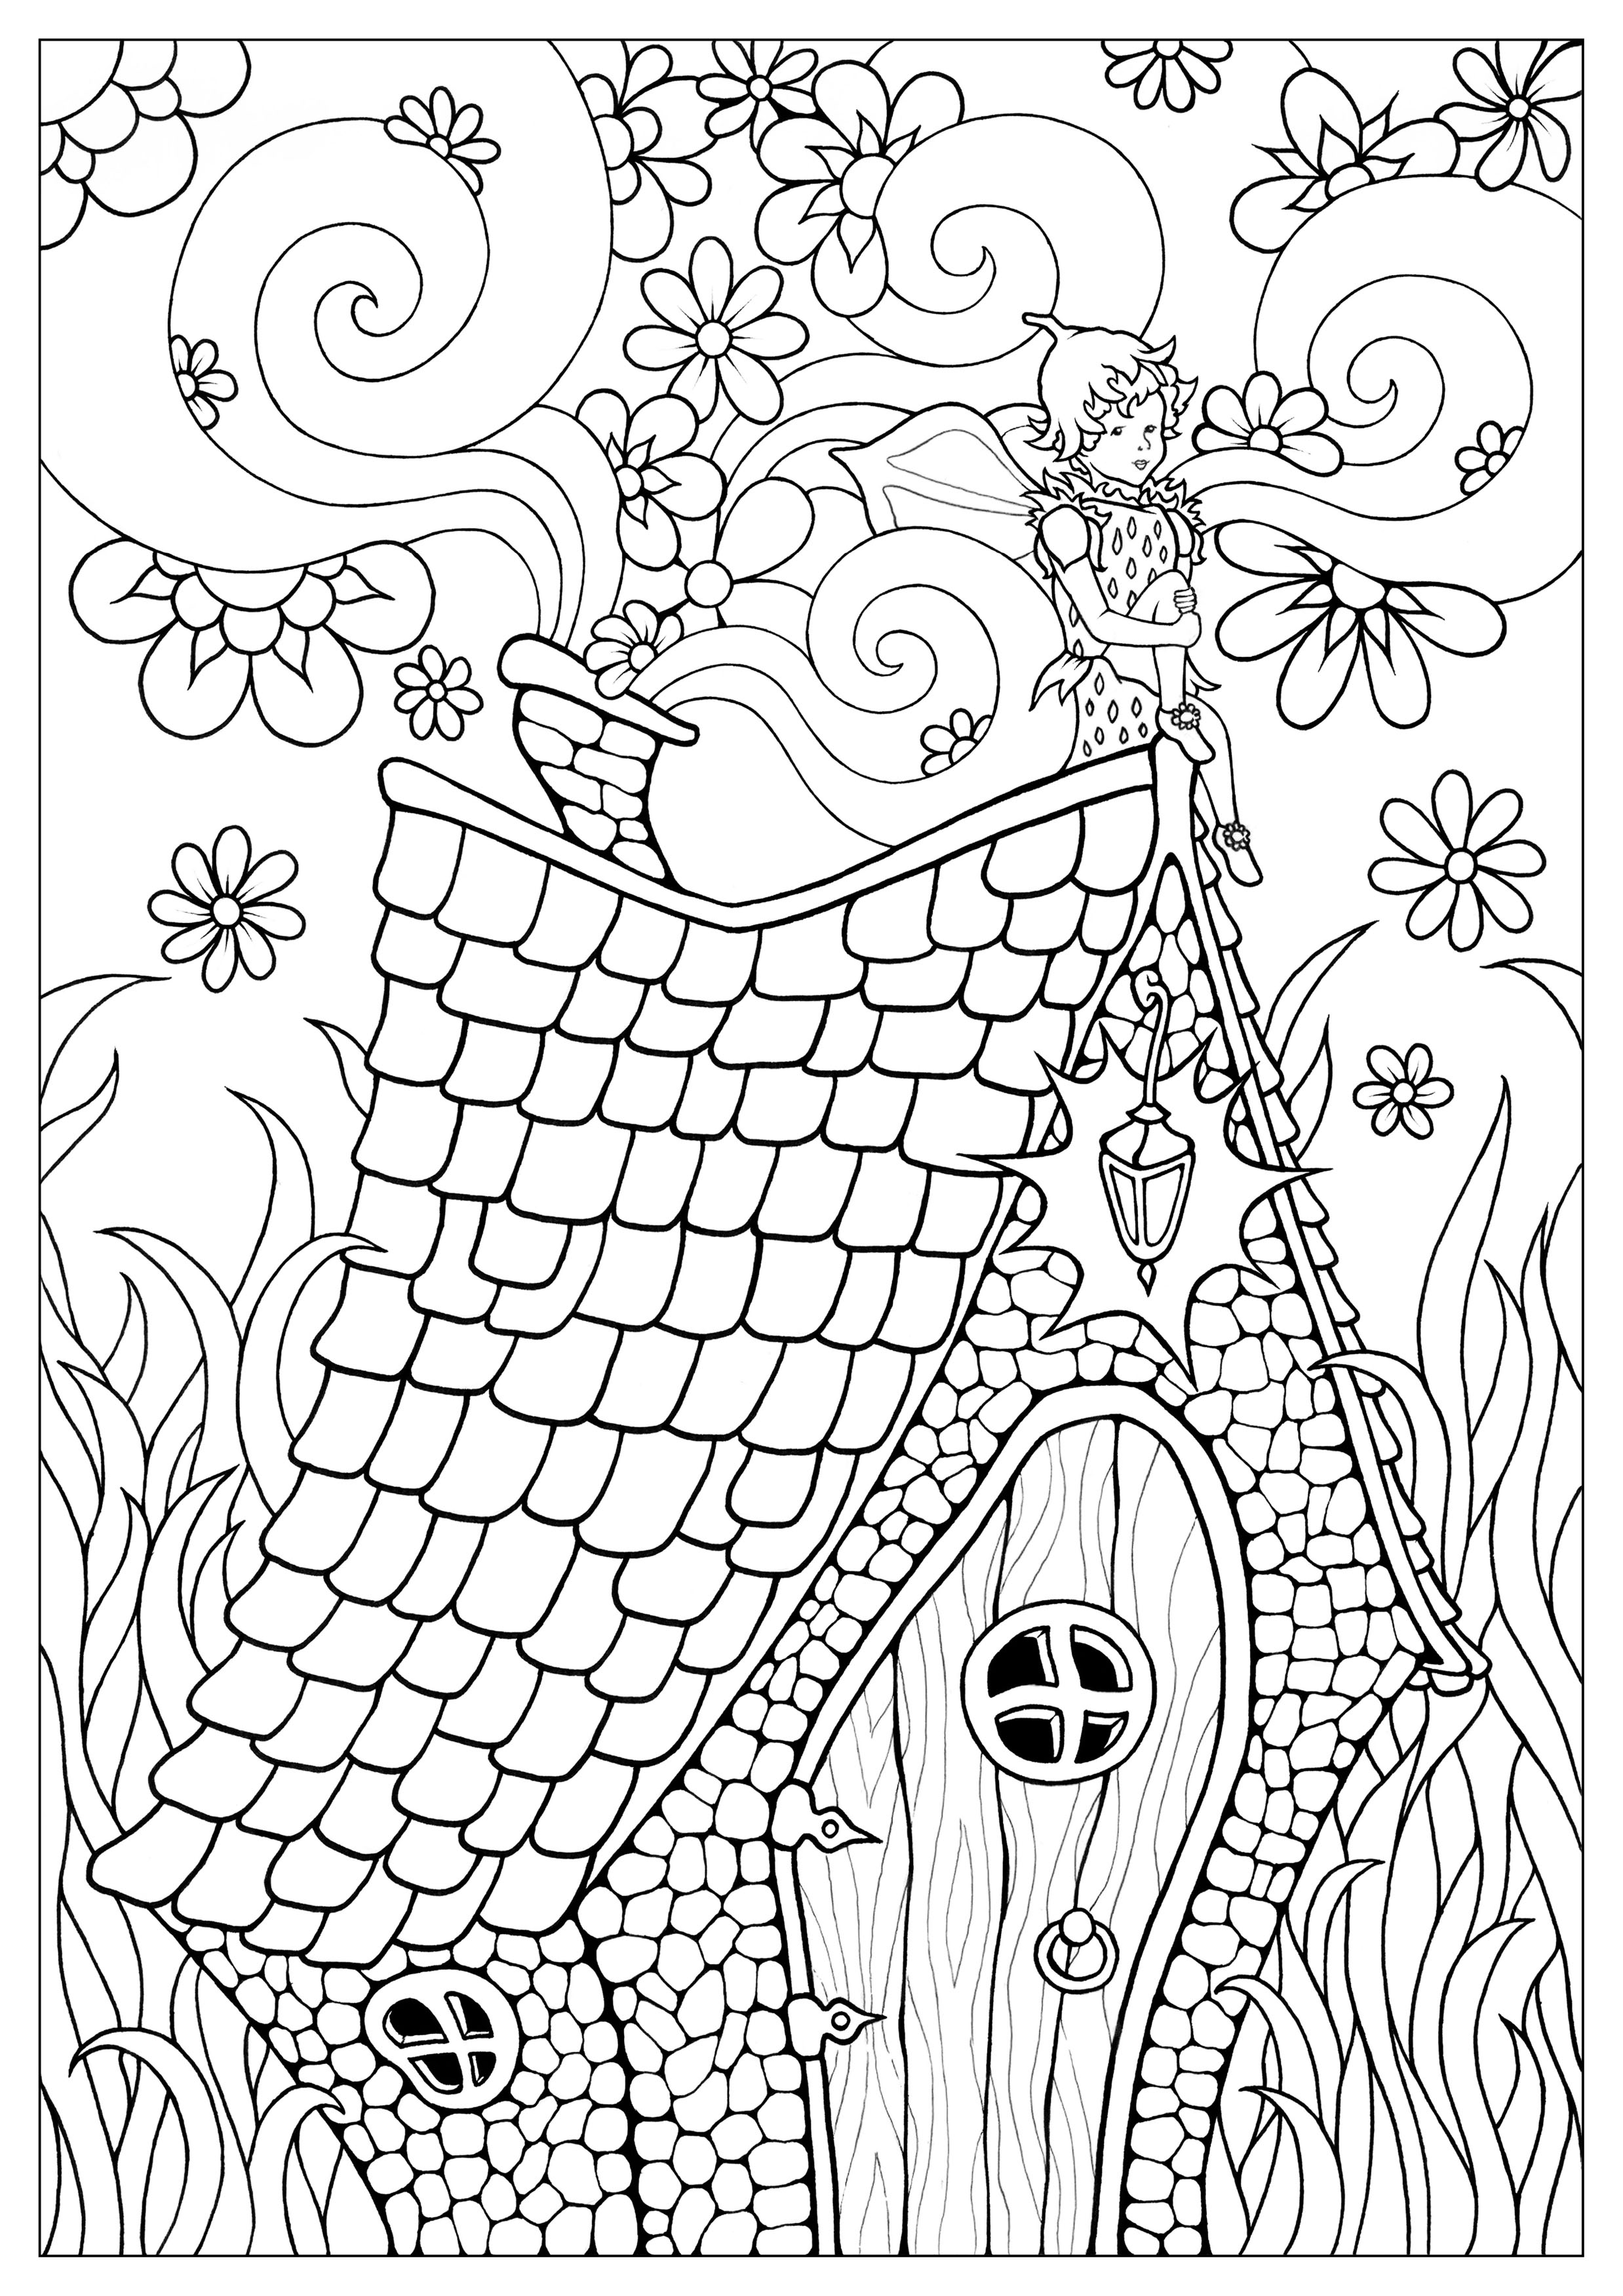 Download Fairy - Coloring Pages for Adults